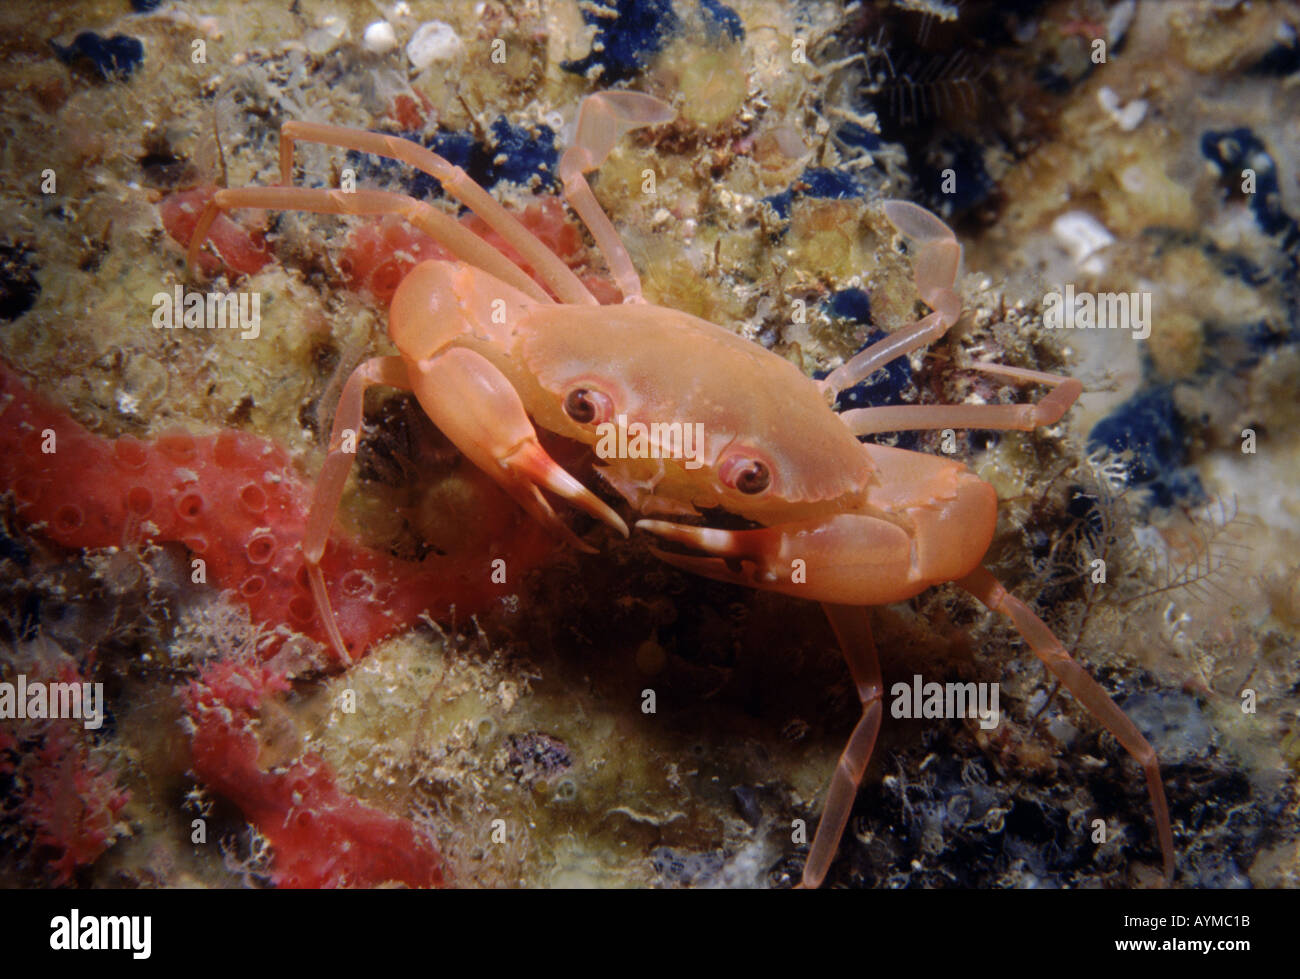 A small orange crab on a rock encrusted with red and blue sponges. Stock Photo